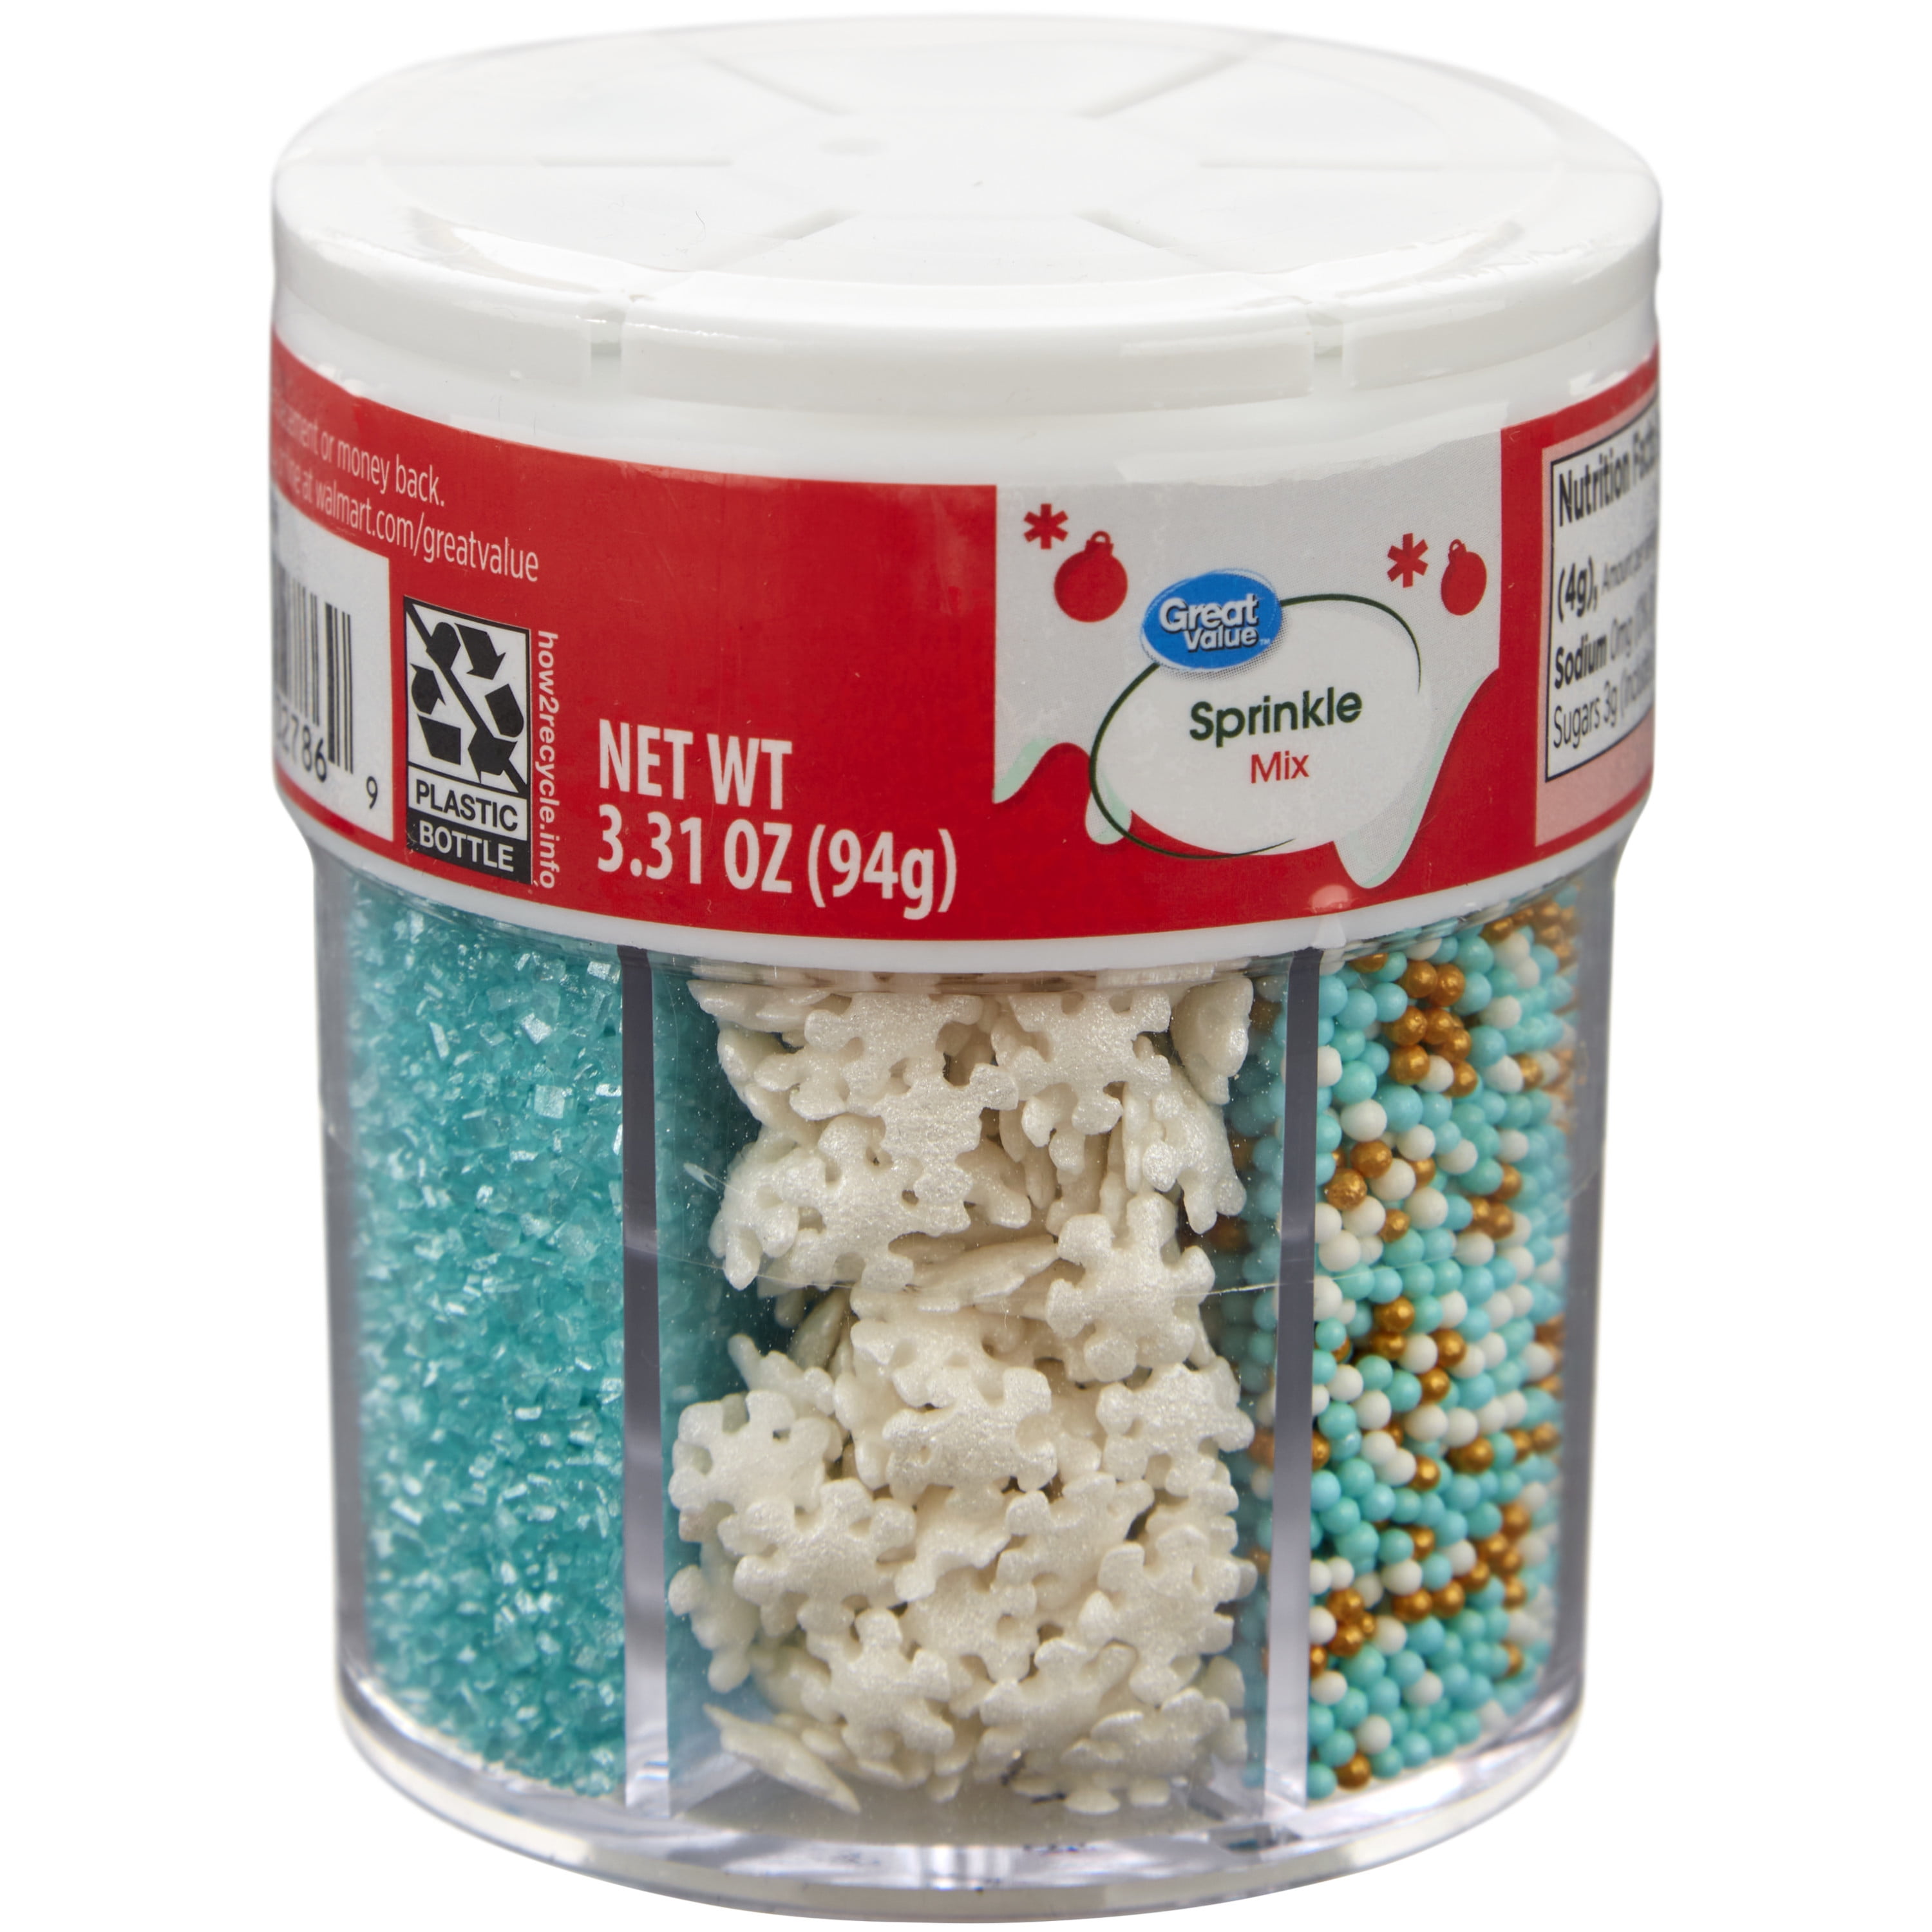 Wilton Great Value White, Blue and Gold Winter Snowflake 6-Cell Sprinkle Mix, 3.31 oz.